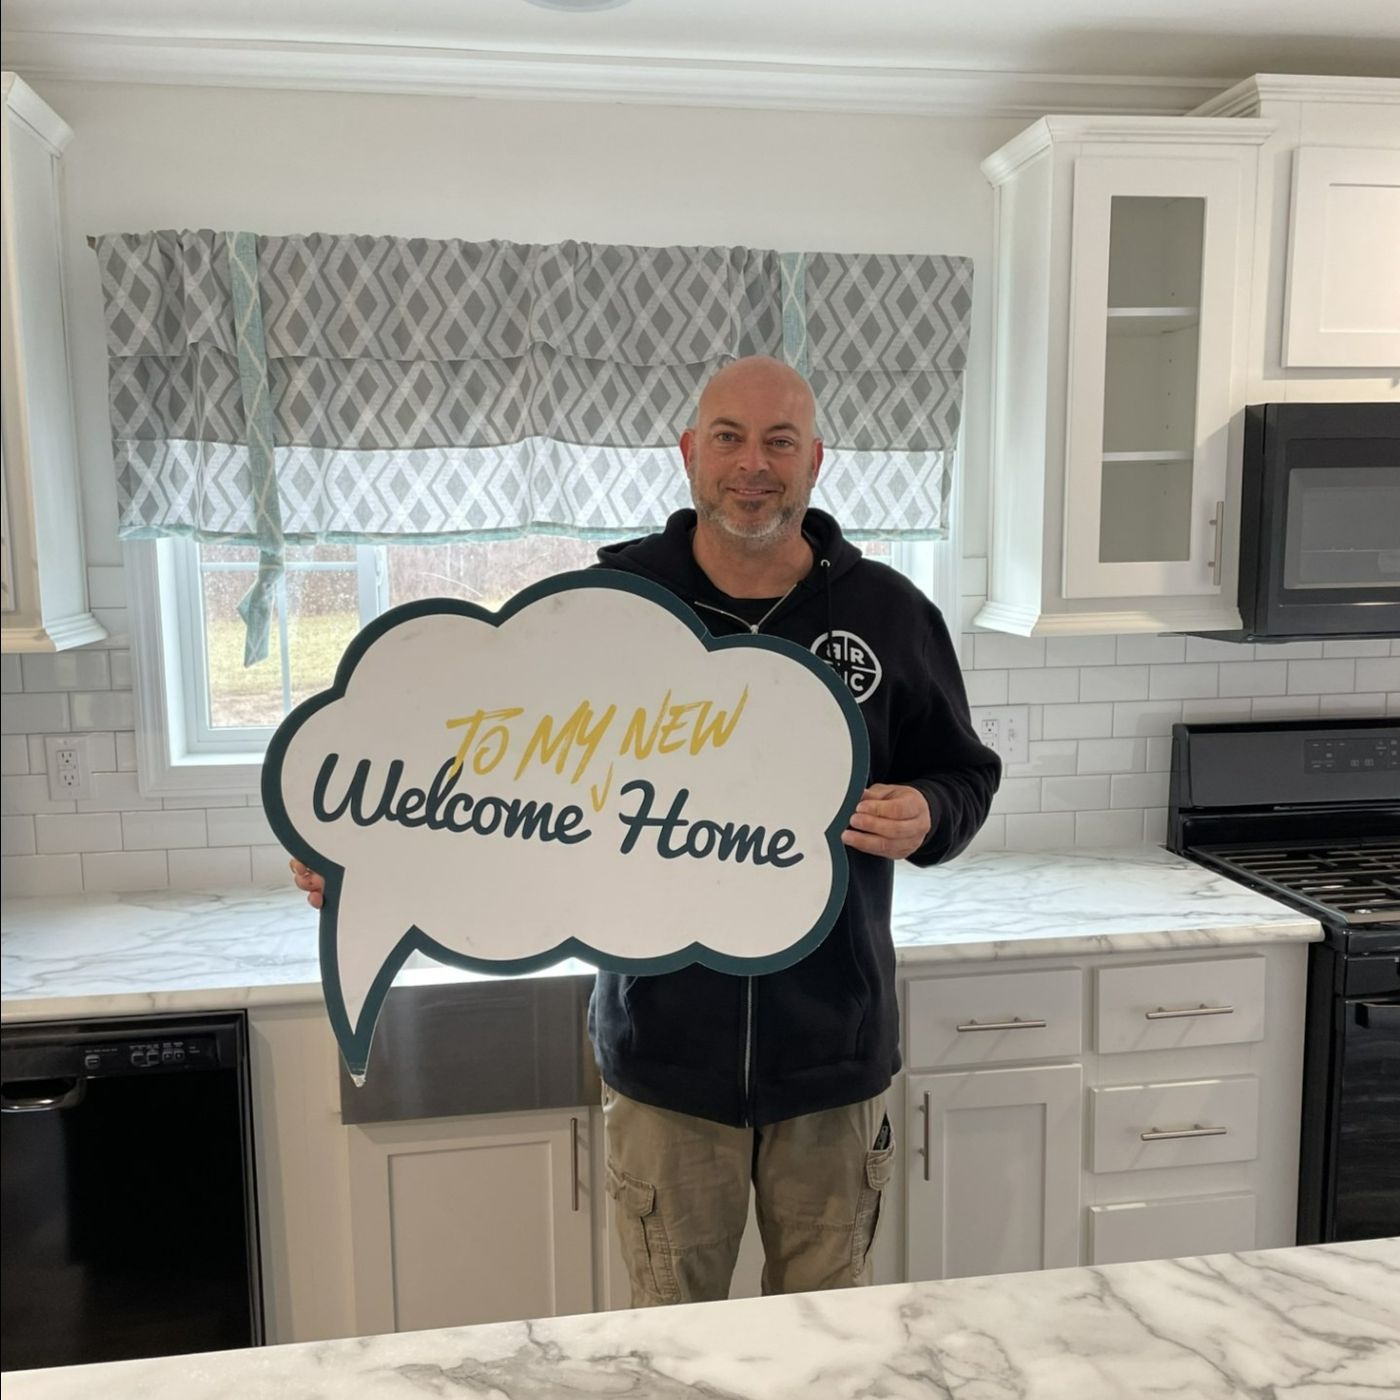 BRYAN Z. welcome home image